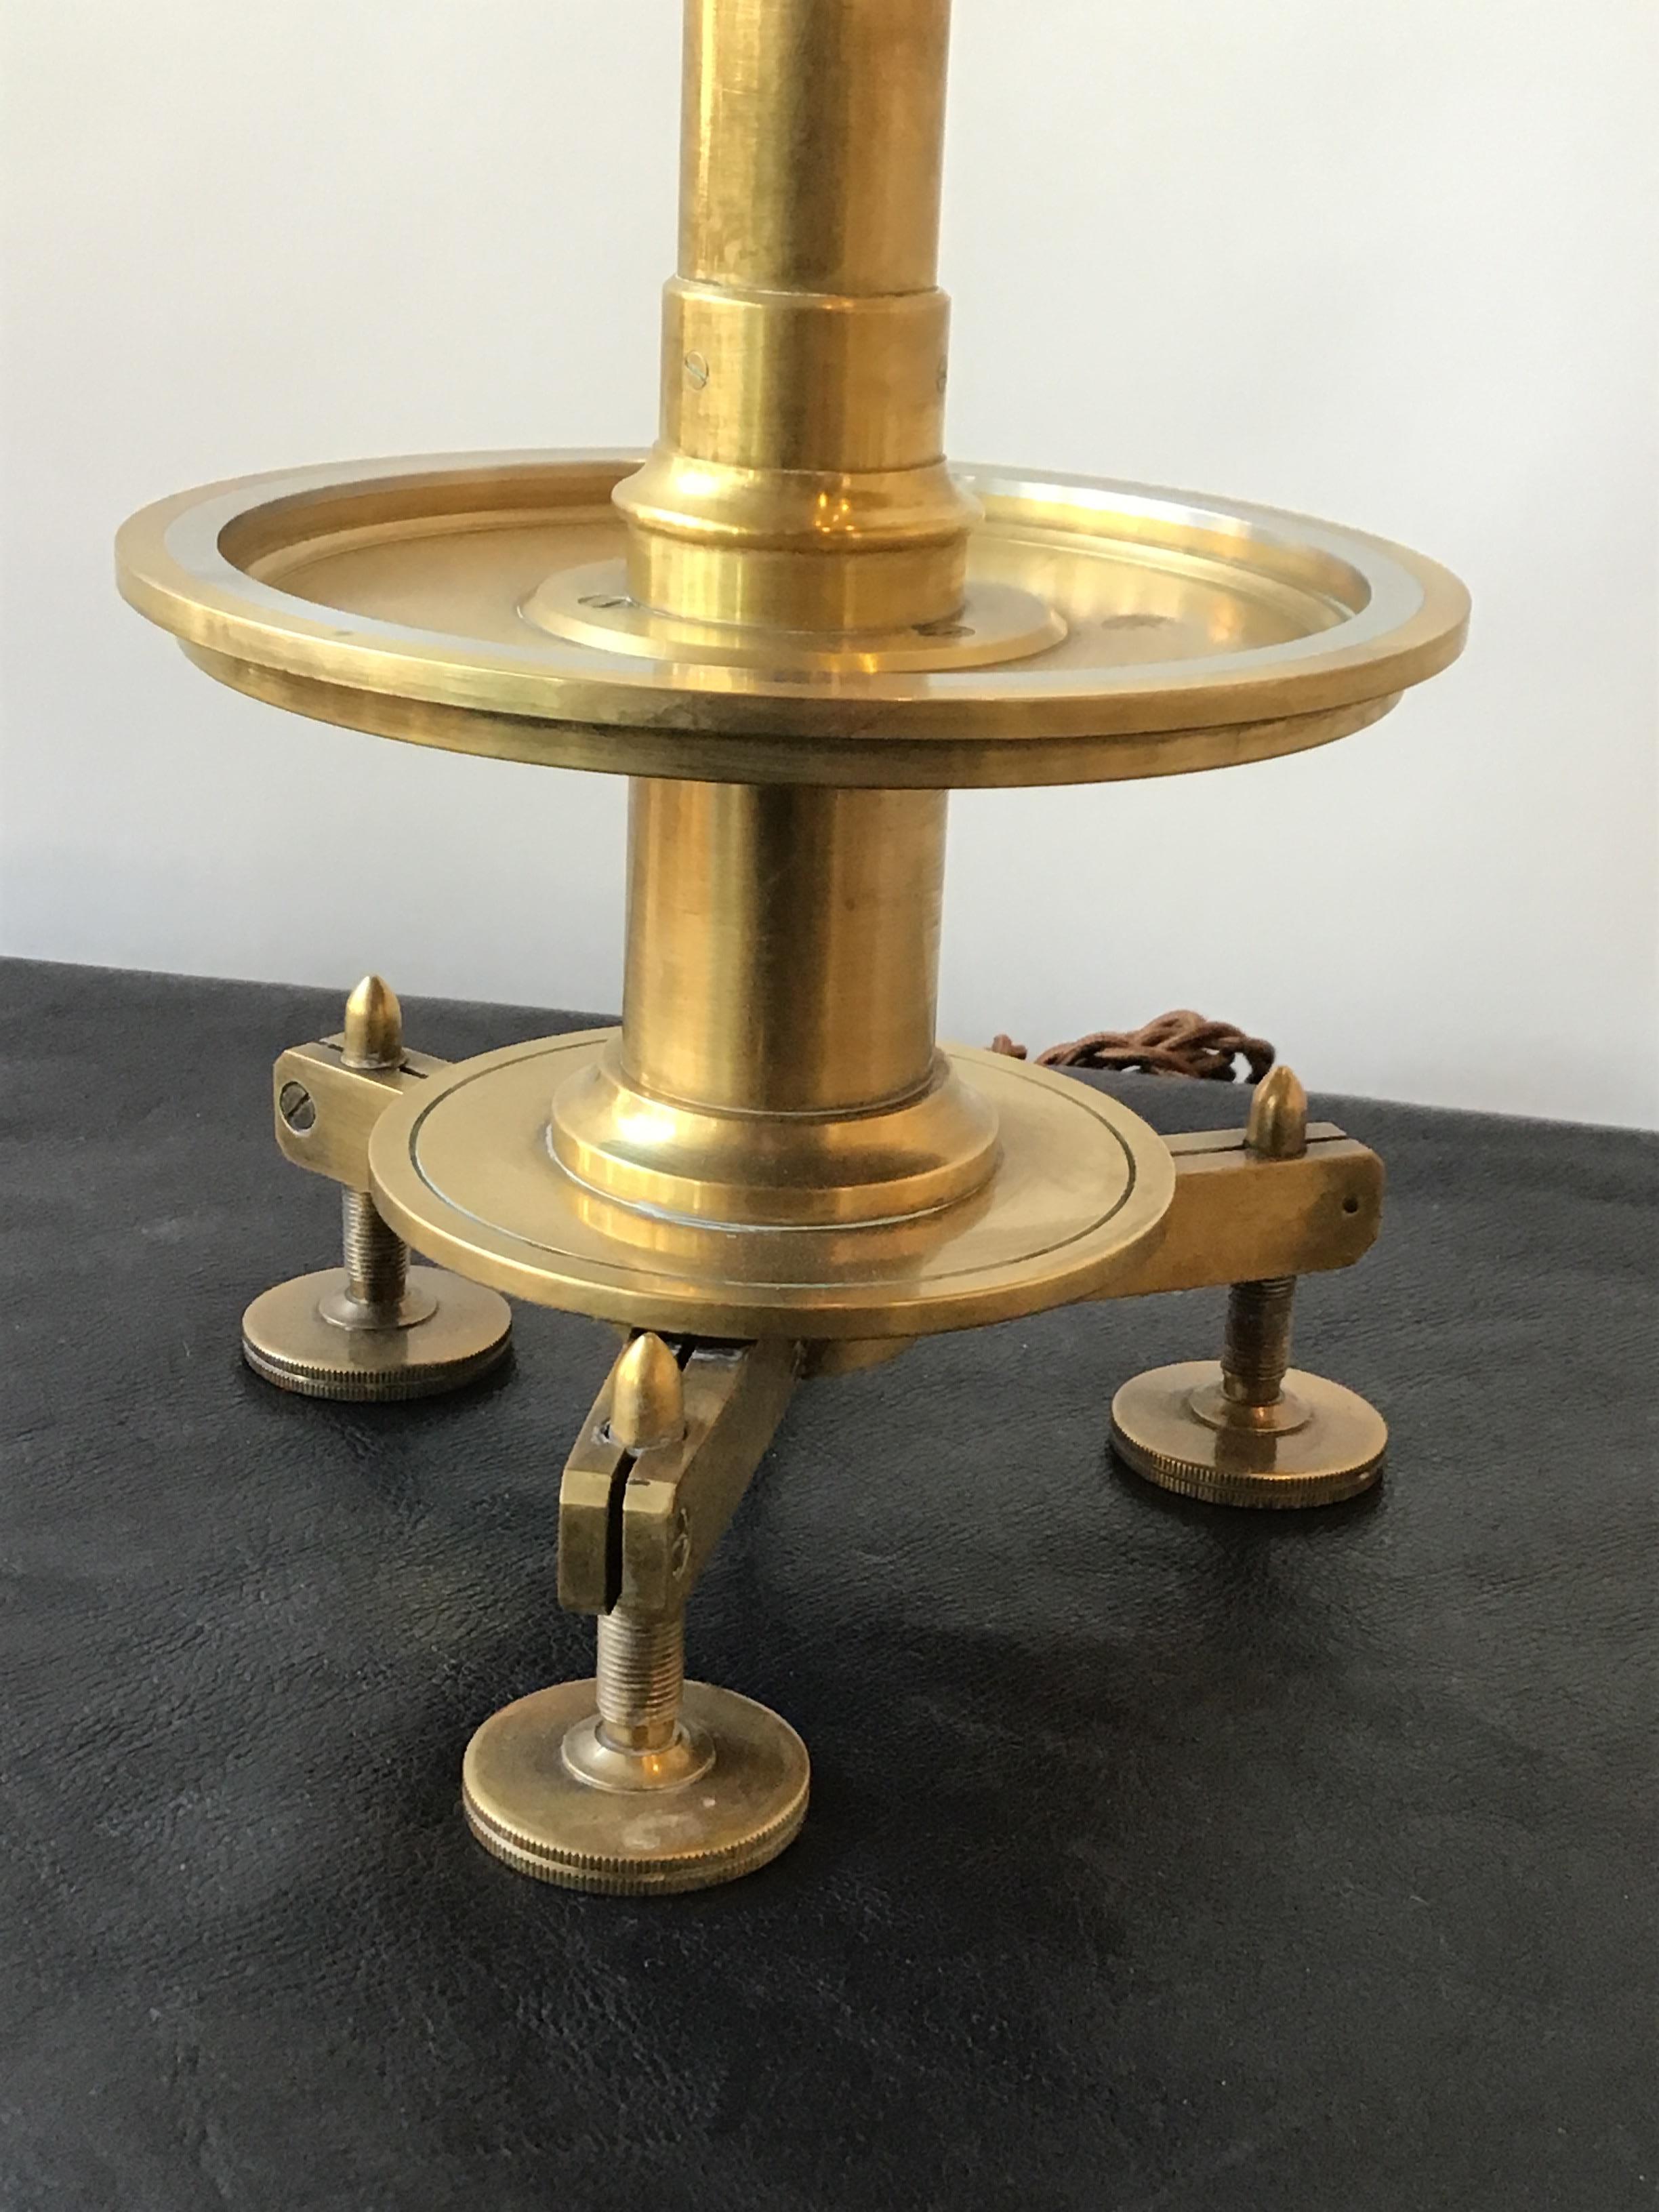 Solid brass, great quality table lamp. Looks like a surveyors instrument. 22” high.